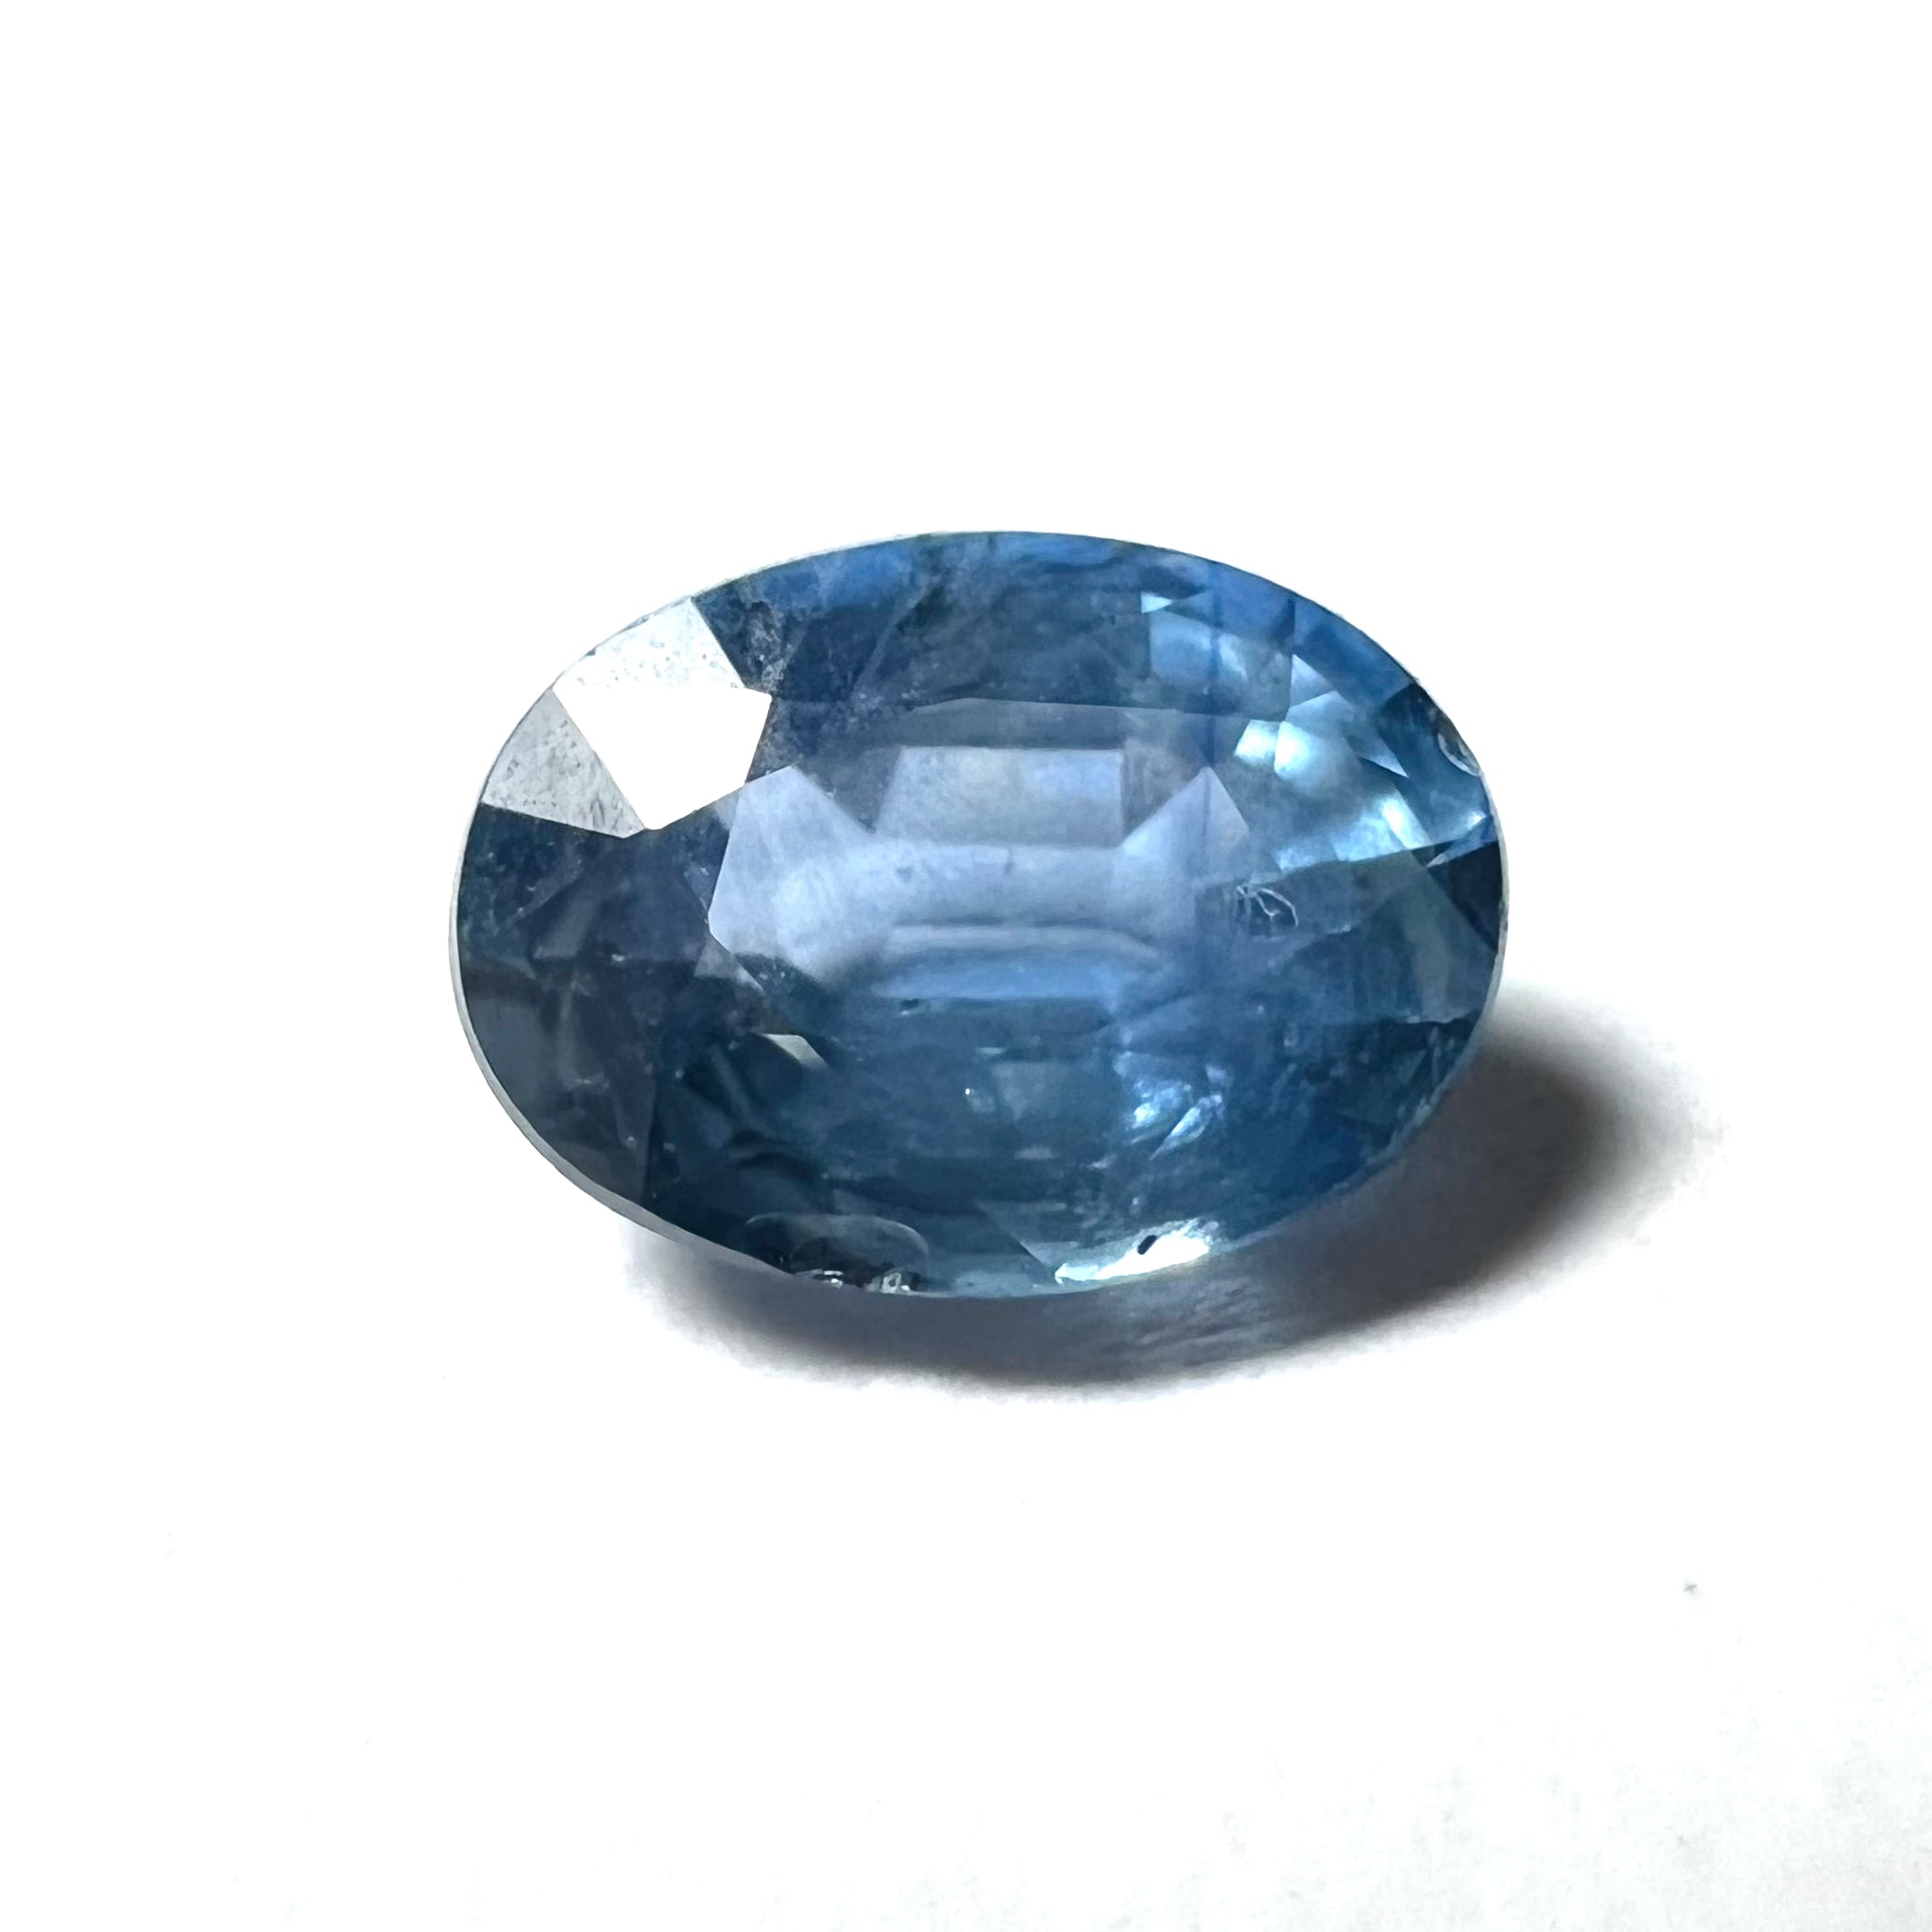 1.06CTW Loose Blue Oval Sapphire 7x5x4.5mm Earth mined Gemstone